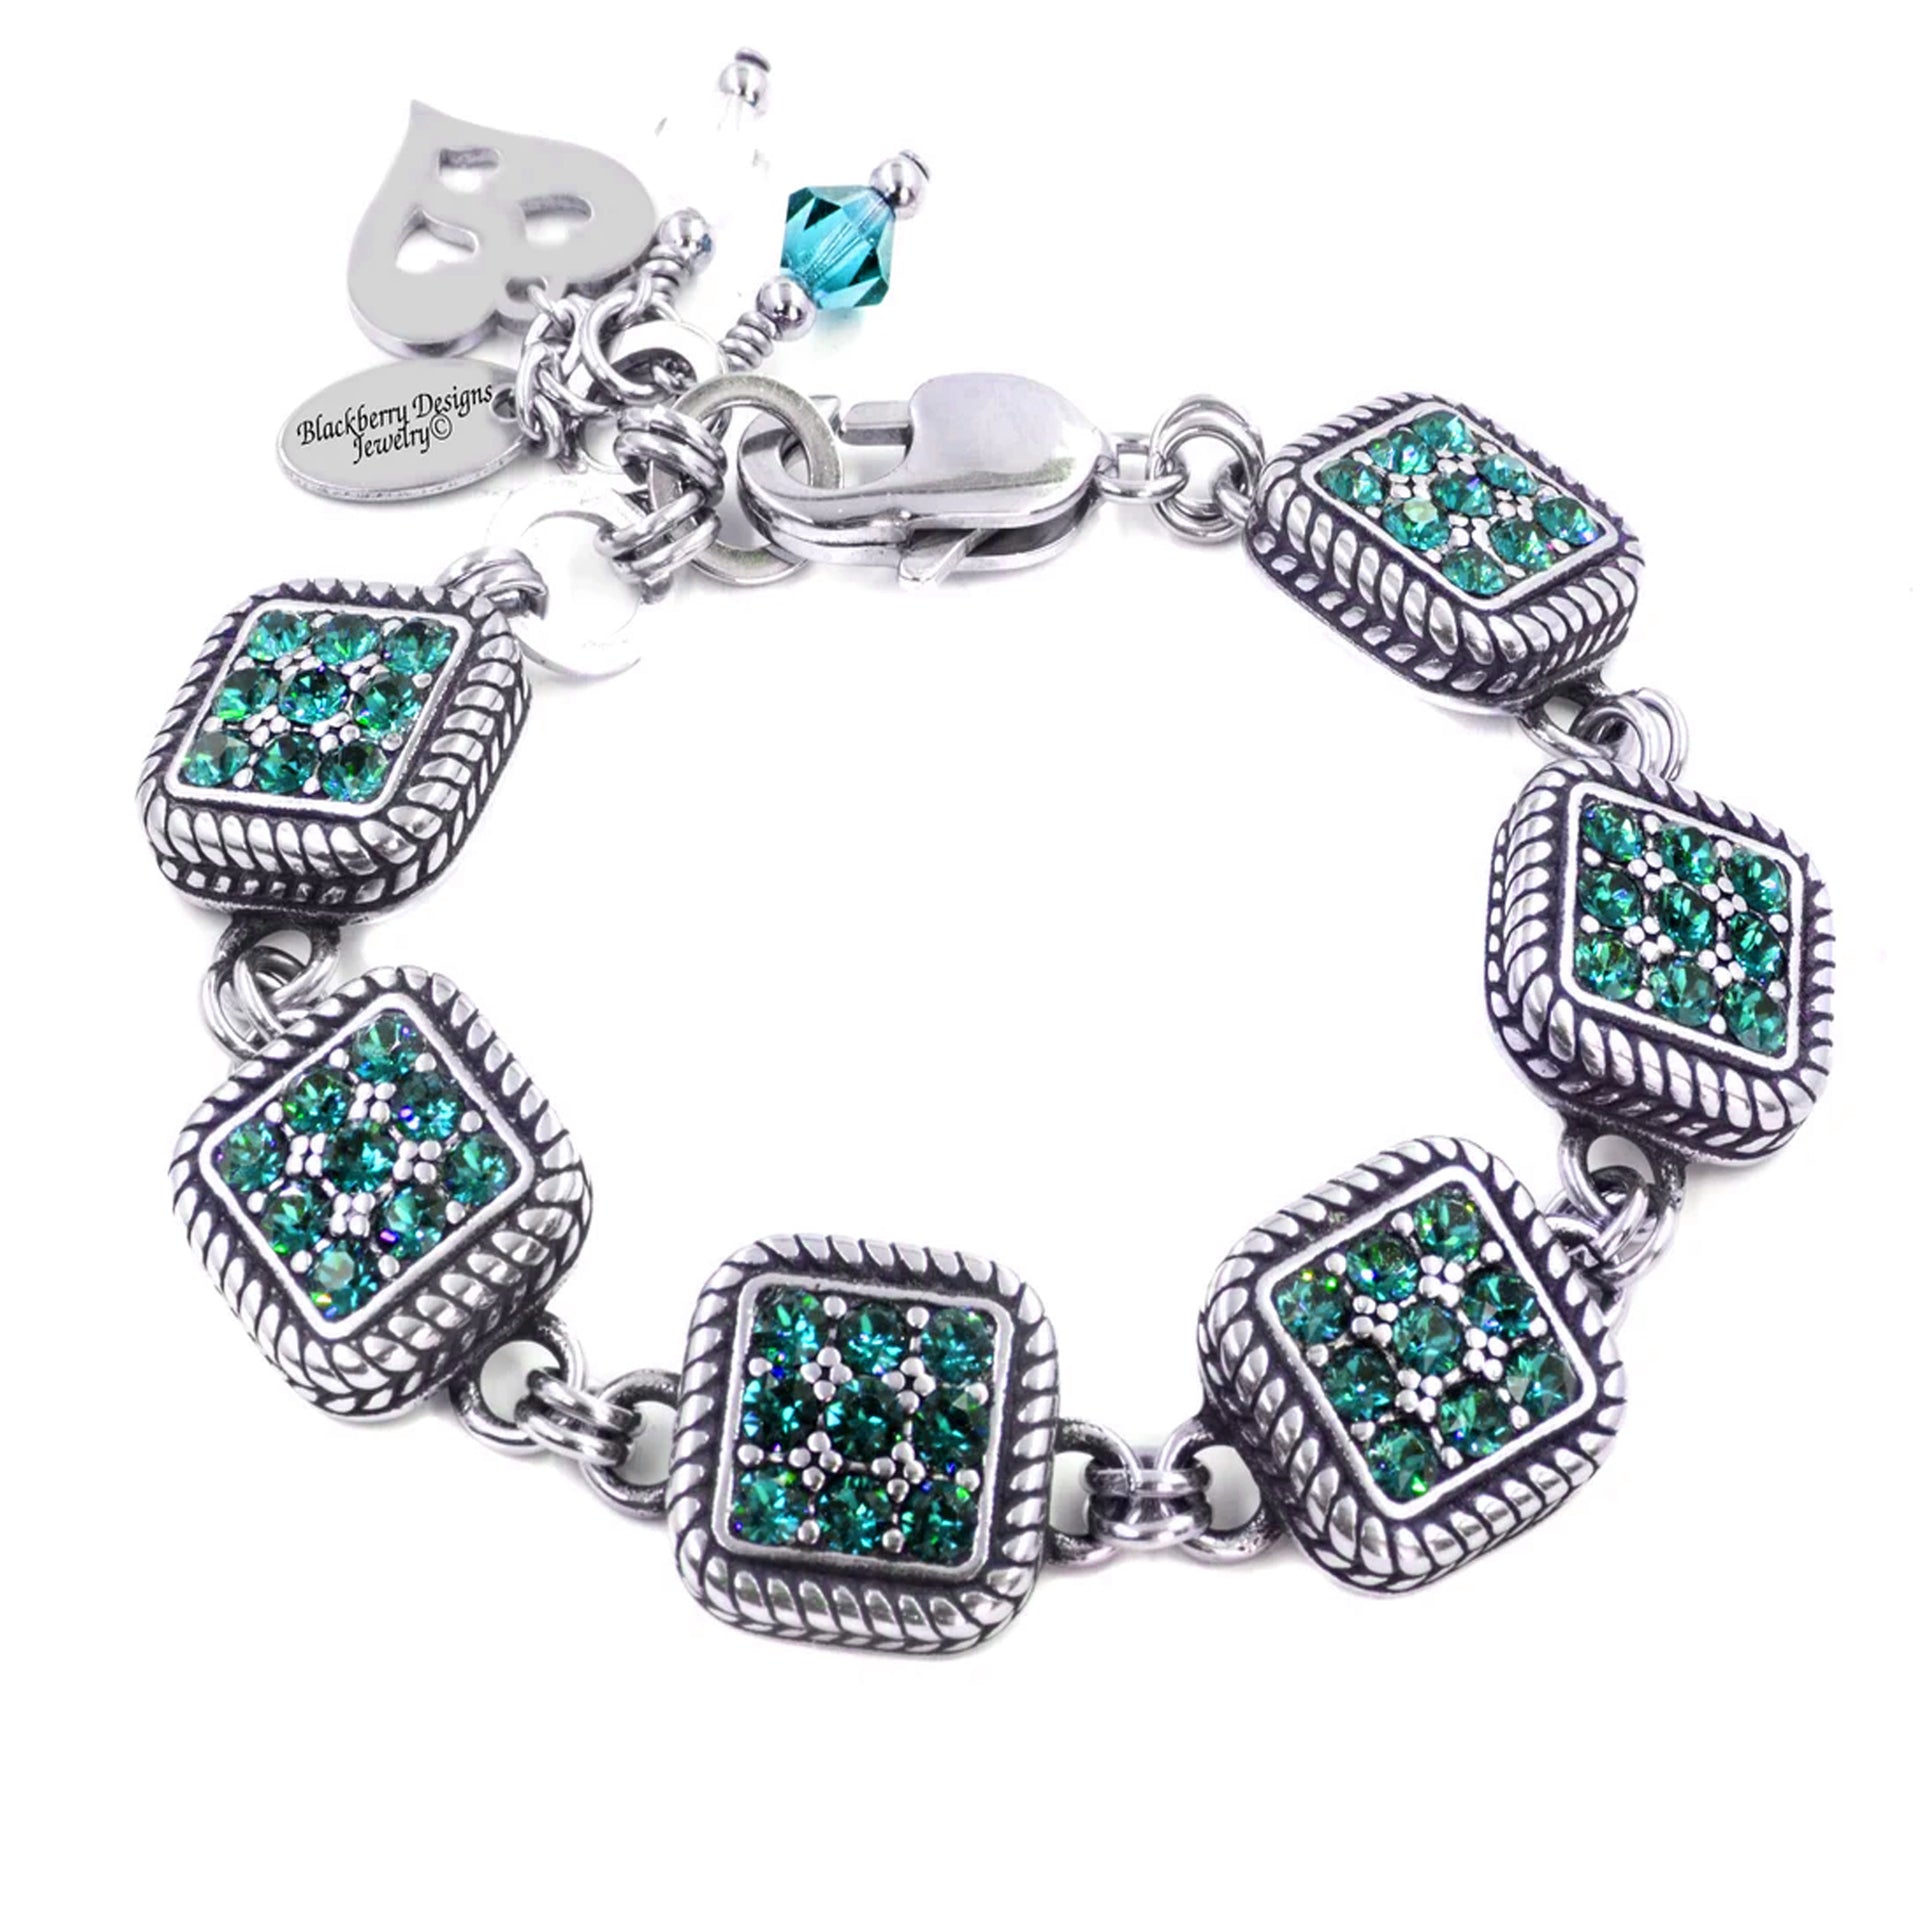 december birthday bracelet gift with chunky links in turquoise crystals